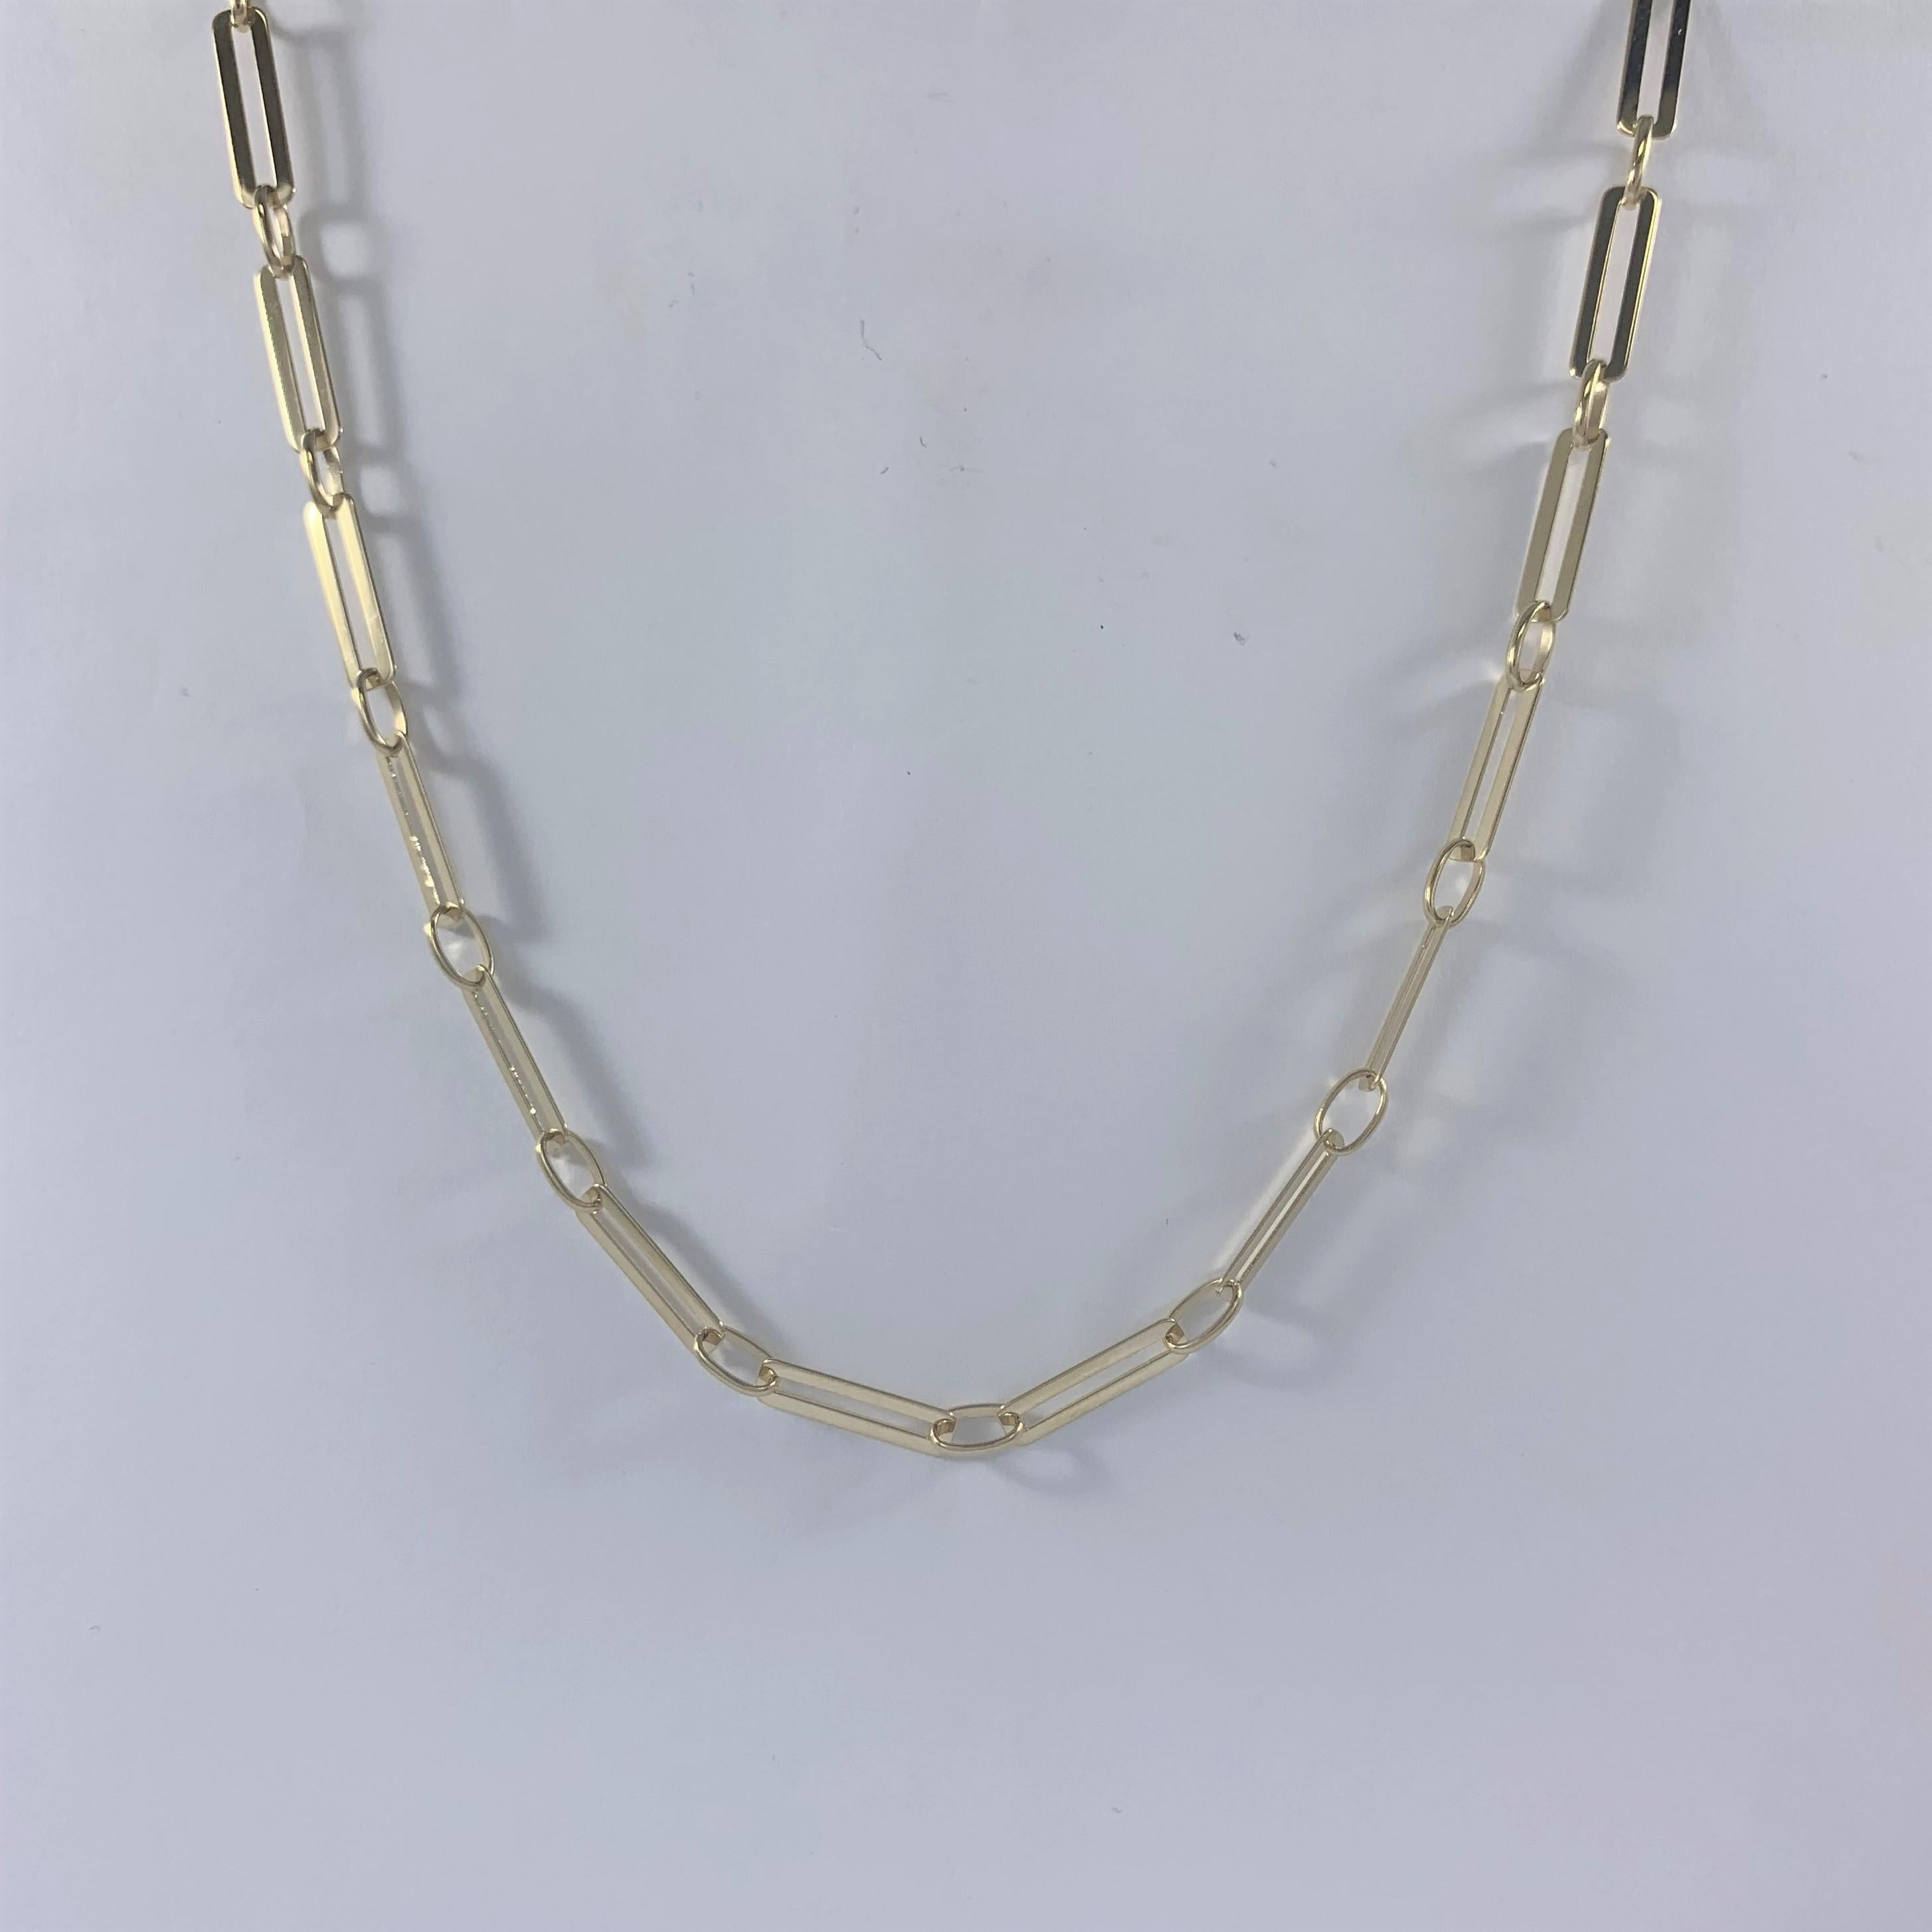 chain necklace link types